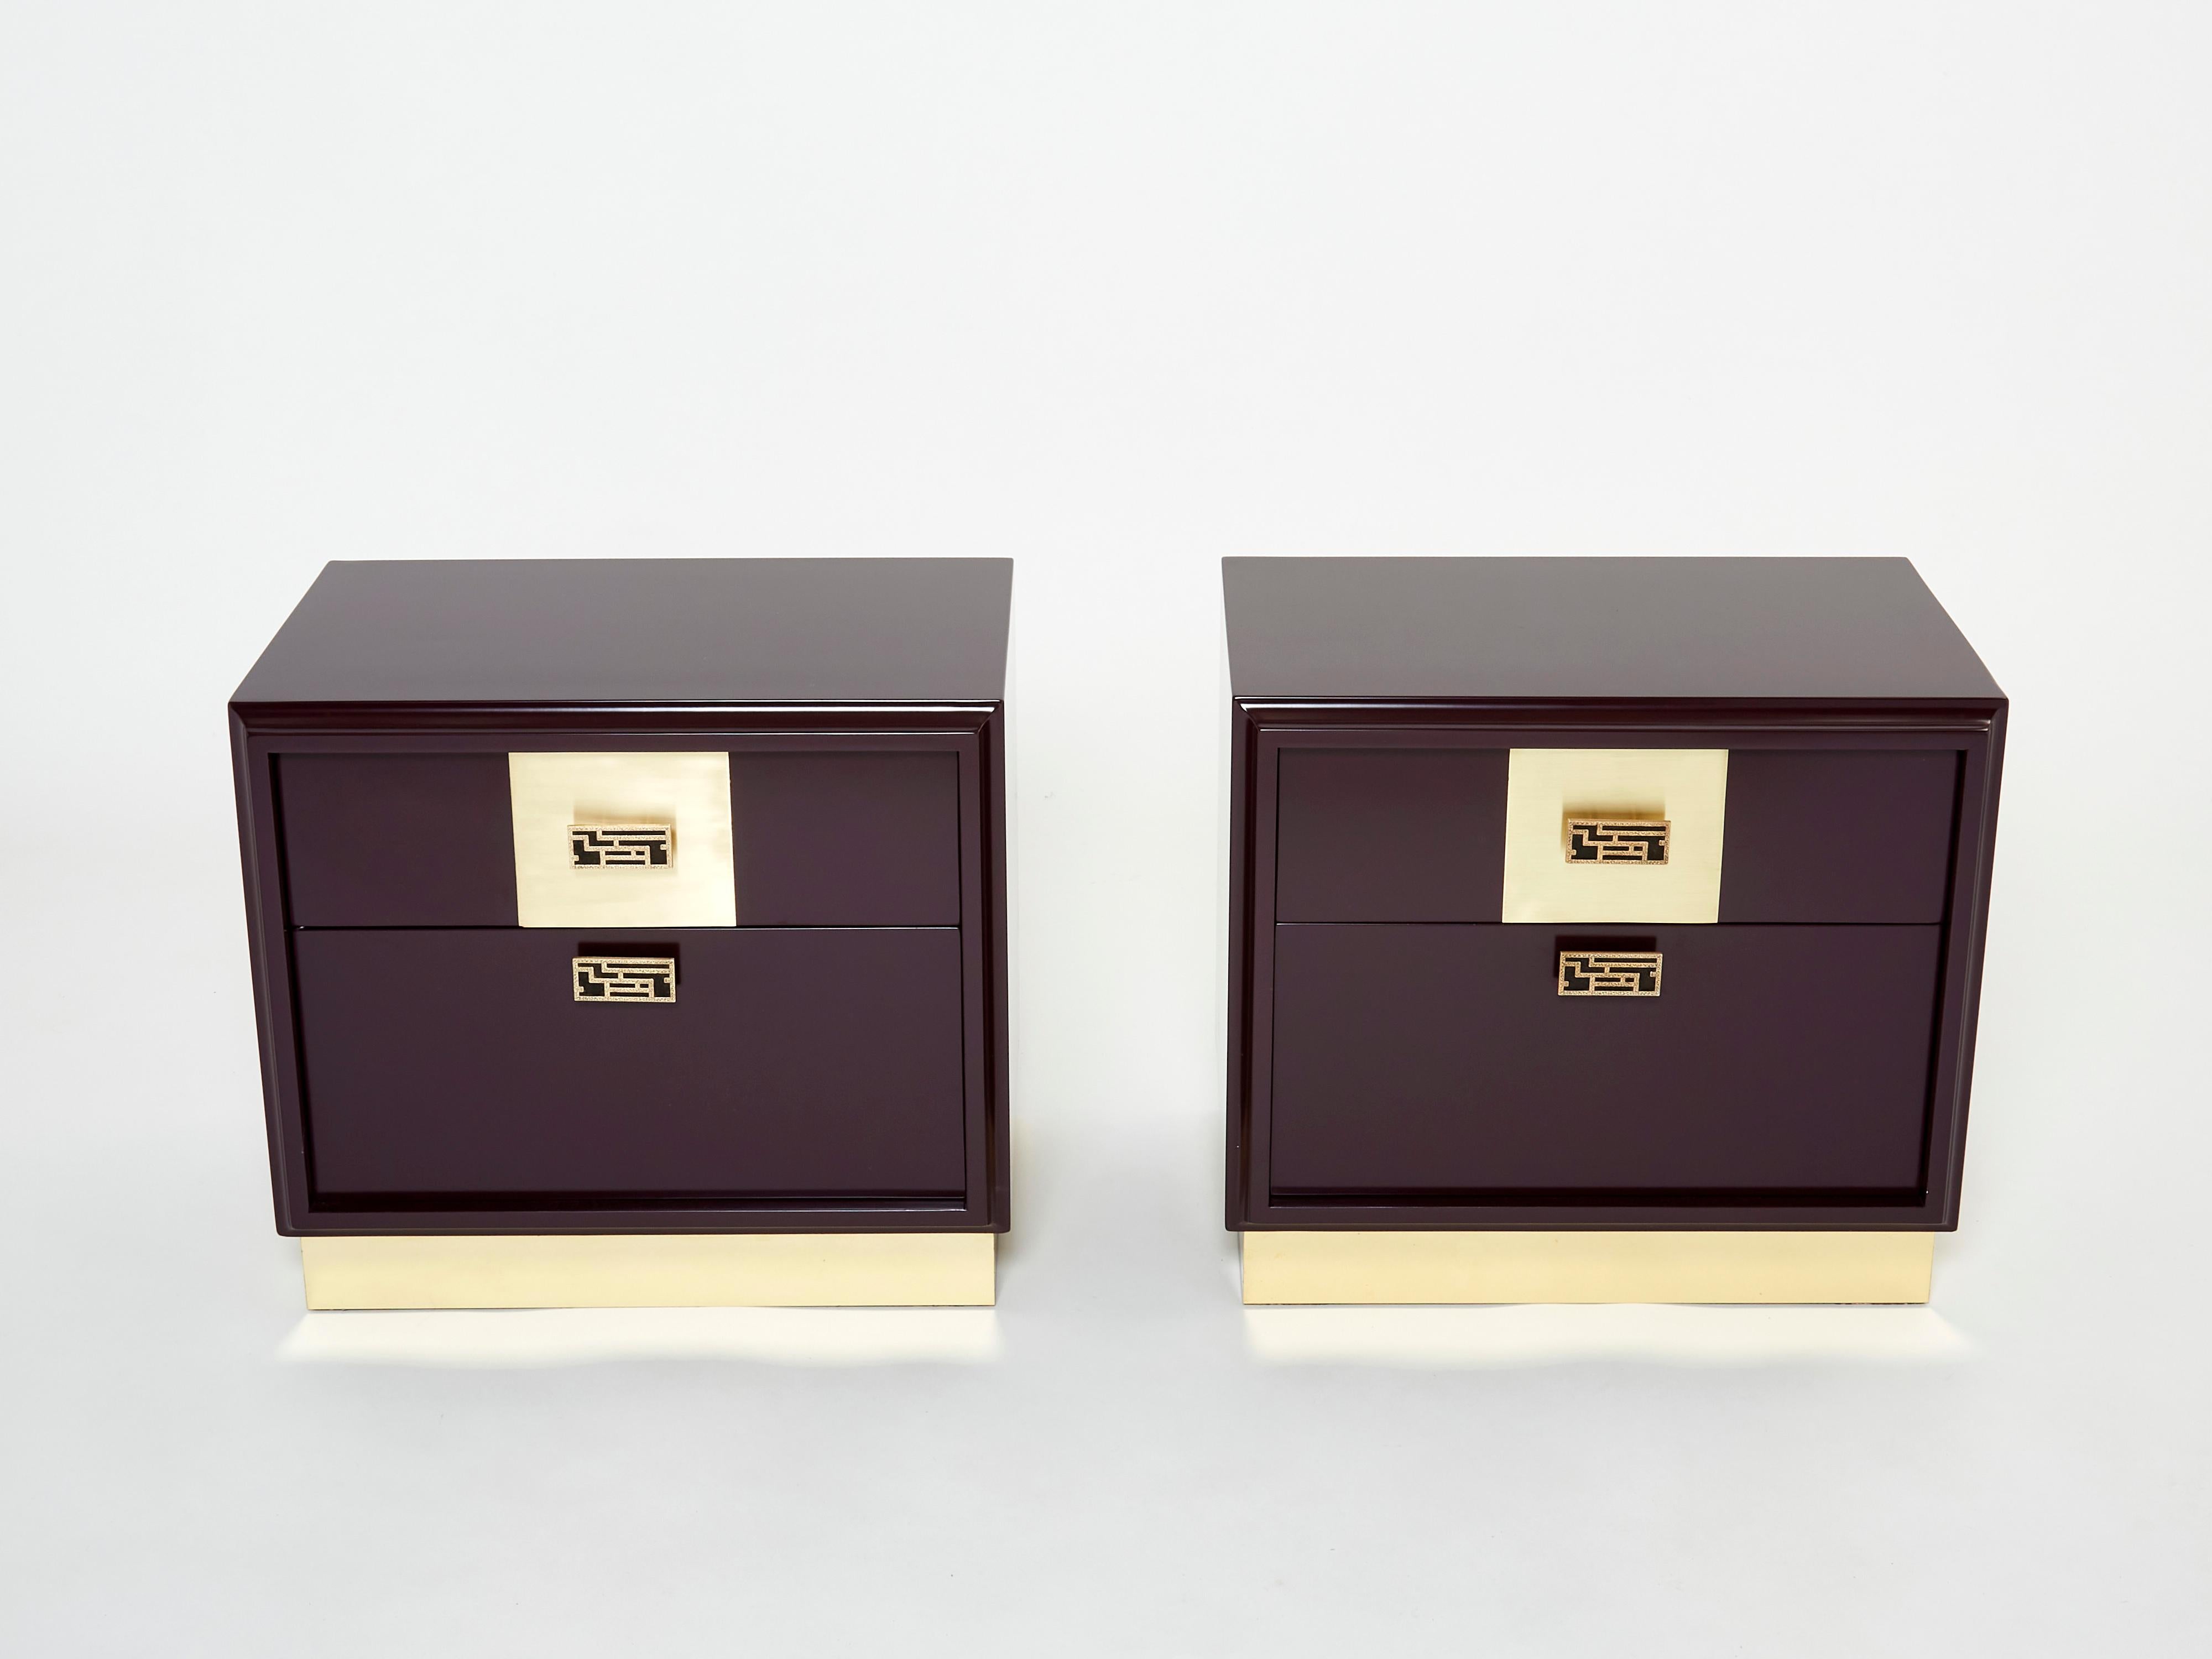 Pair of Italian Luciano Frigerio Plum Lacquered Brass Nightstands Tables, 1970s For Sale 7